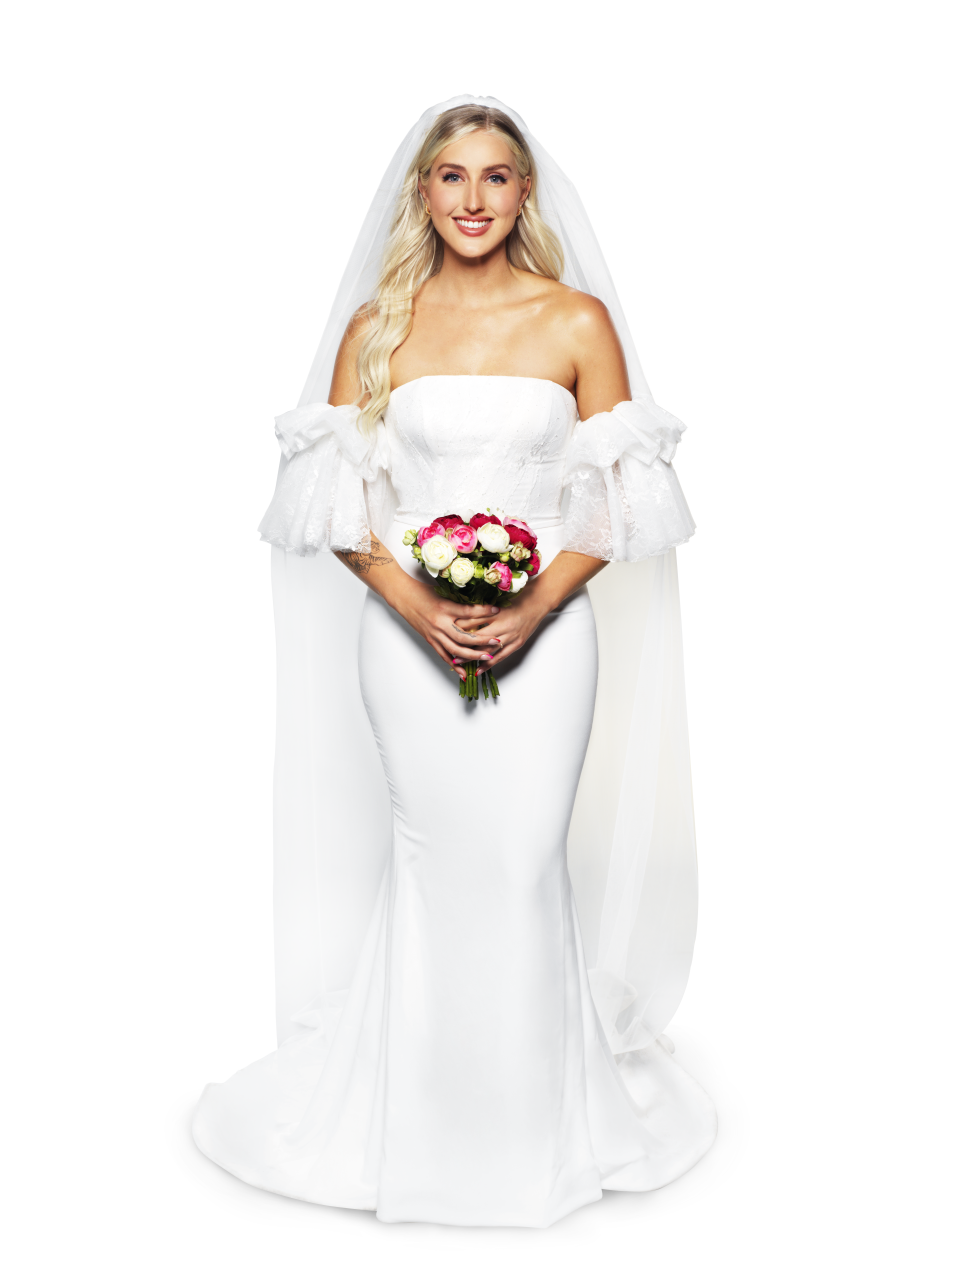 Married At First Sight Australia 2022 Bride Samantha wears a strapless gown with off-the-shoulder sleeve and train and veil, carries pink and white roses, and wears her long curly blonde hair loose.